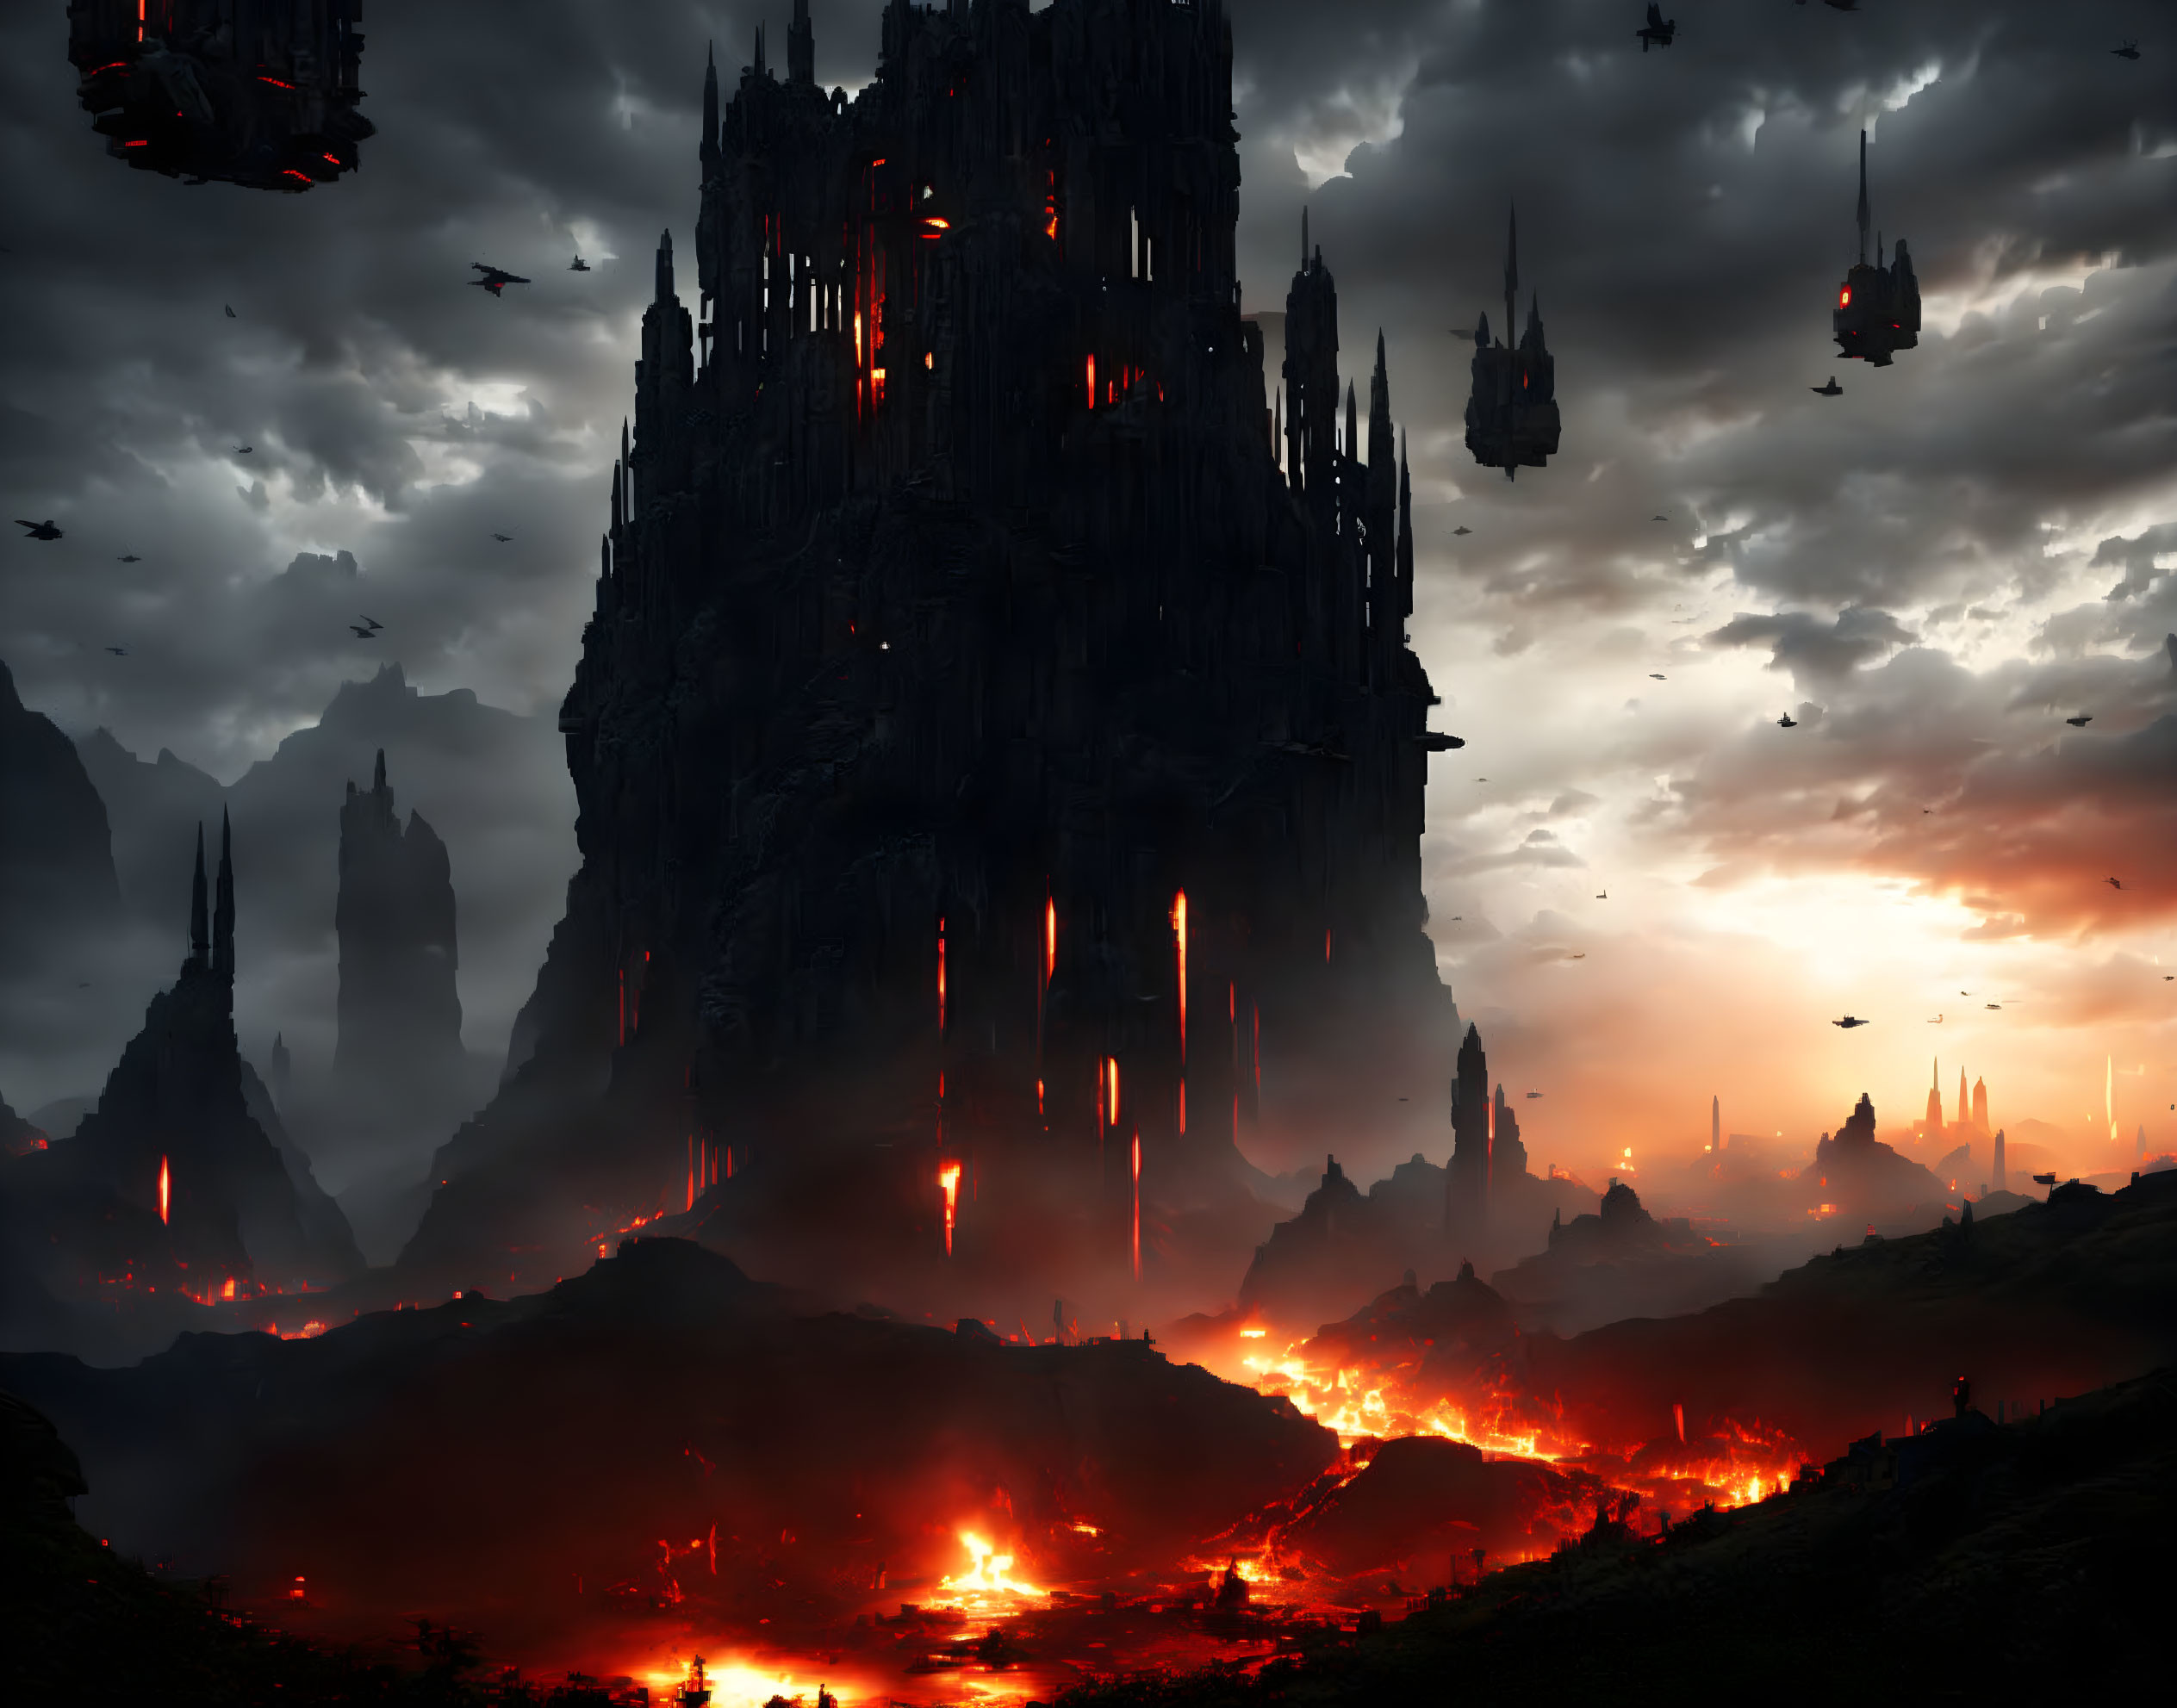 Dystopian landscape with towering castle, lava flows, floating structures